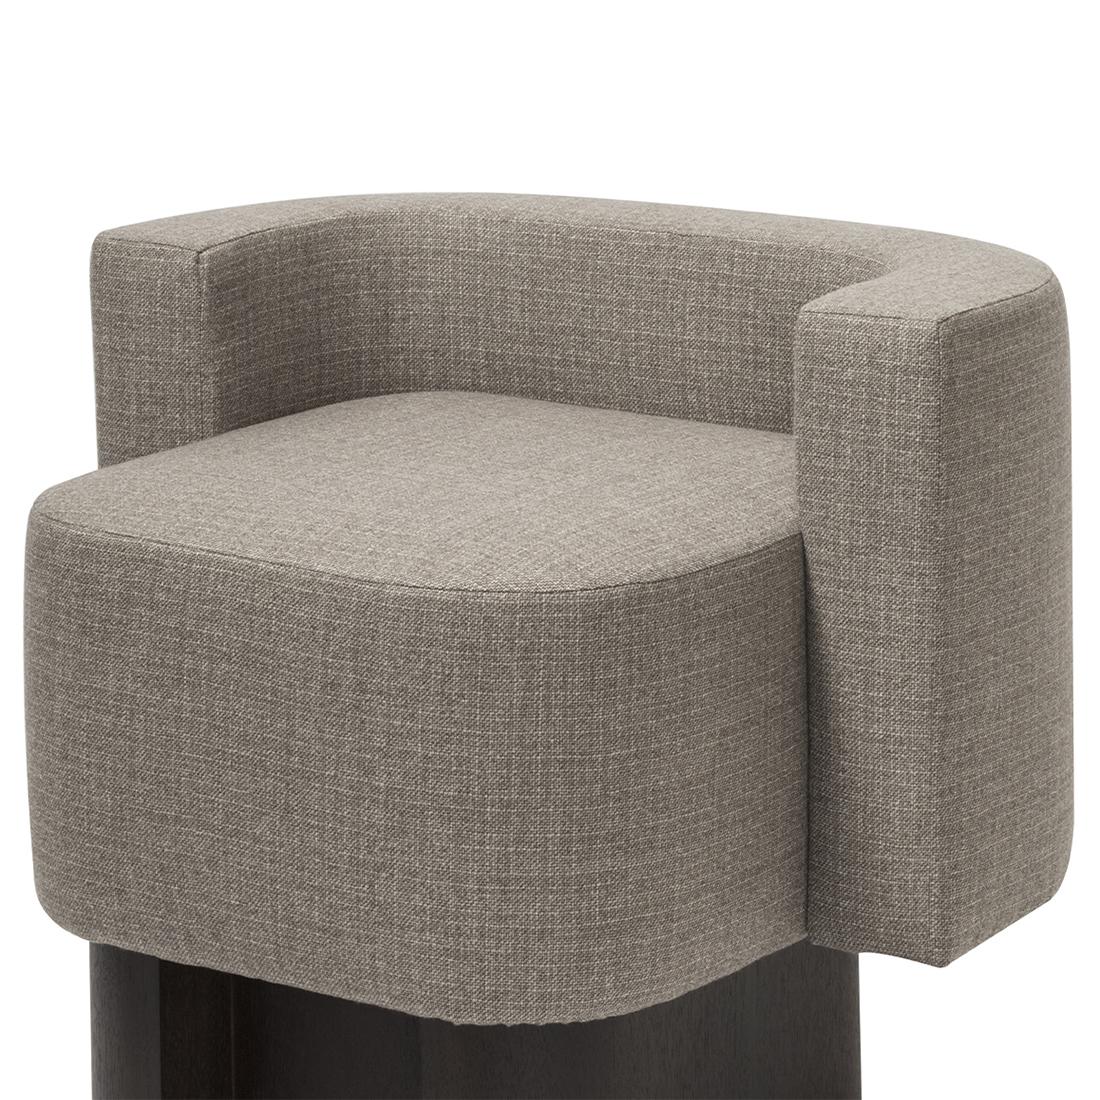 Armchair Bergam with solid walnut base
in blackened finish. Upholstered and covered
seat with cashmere and wool fabric.